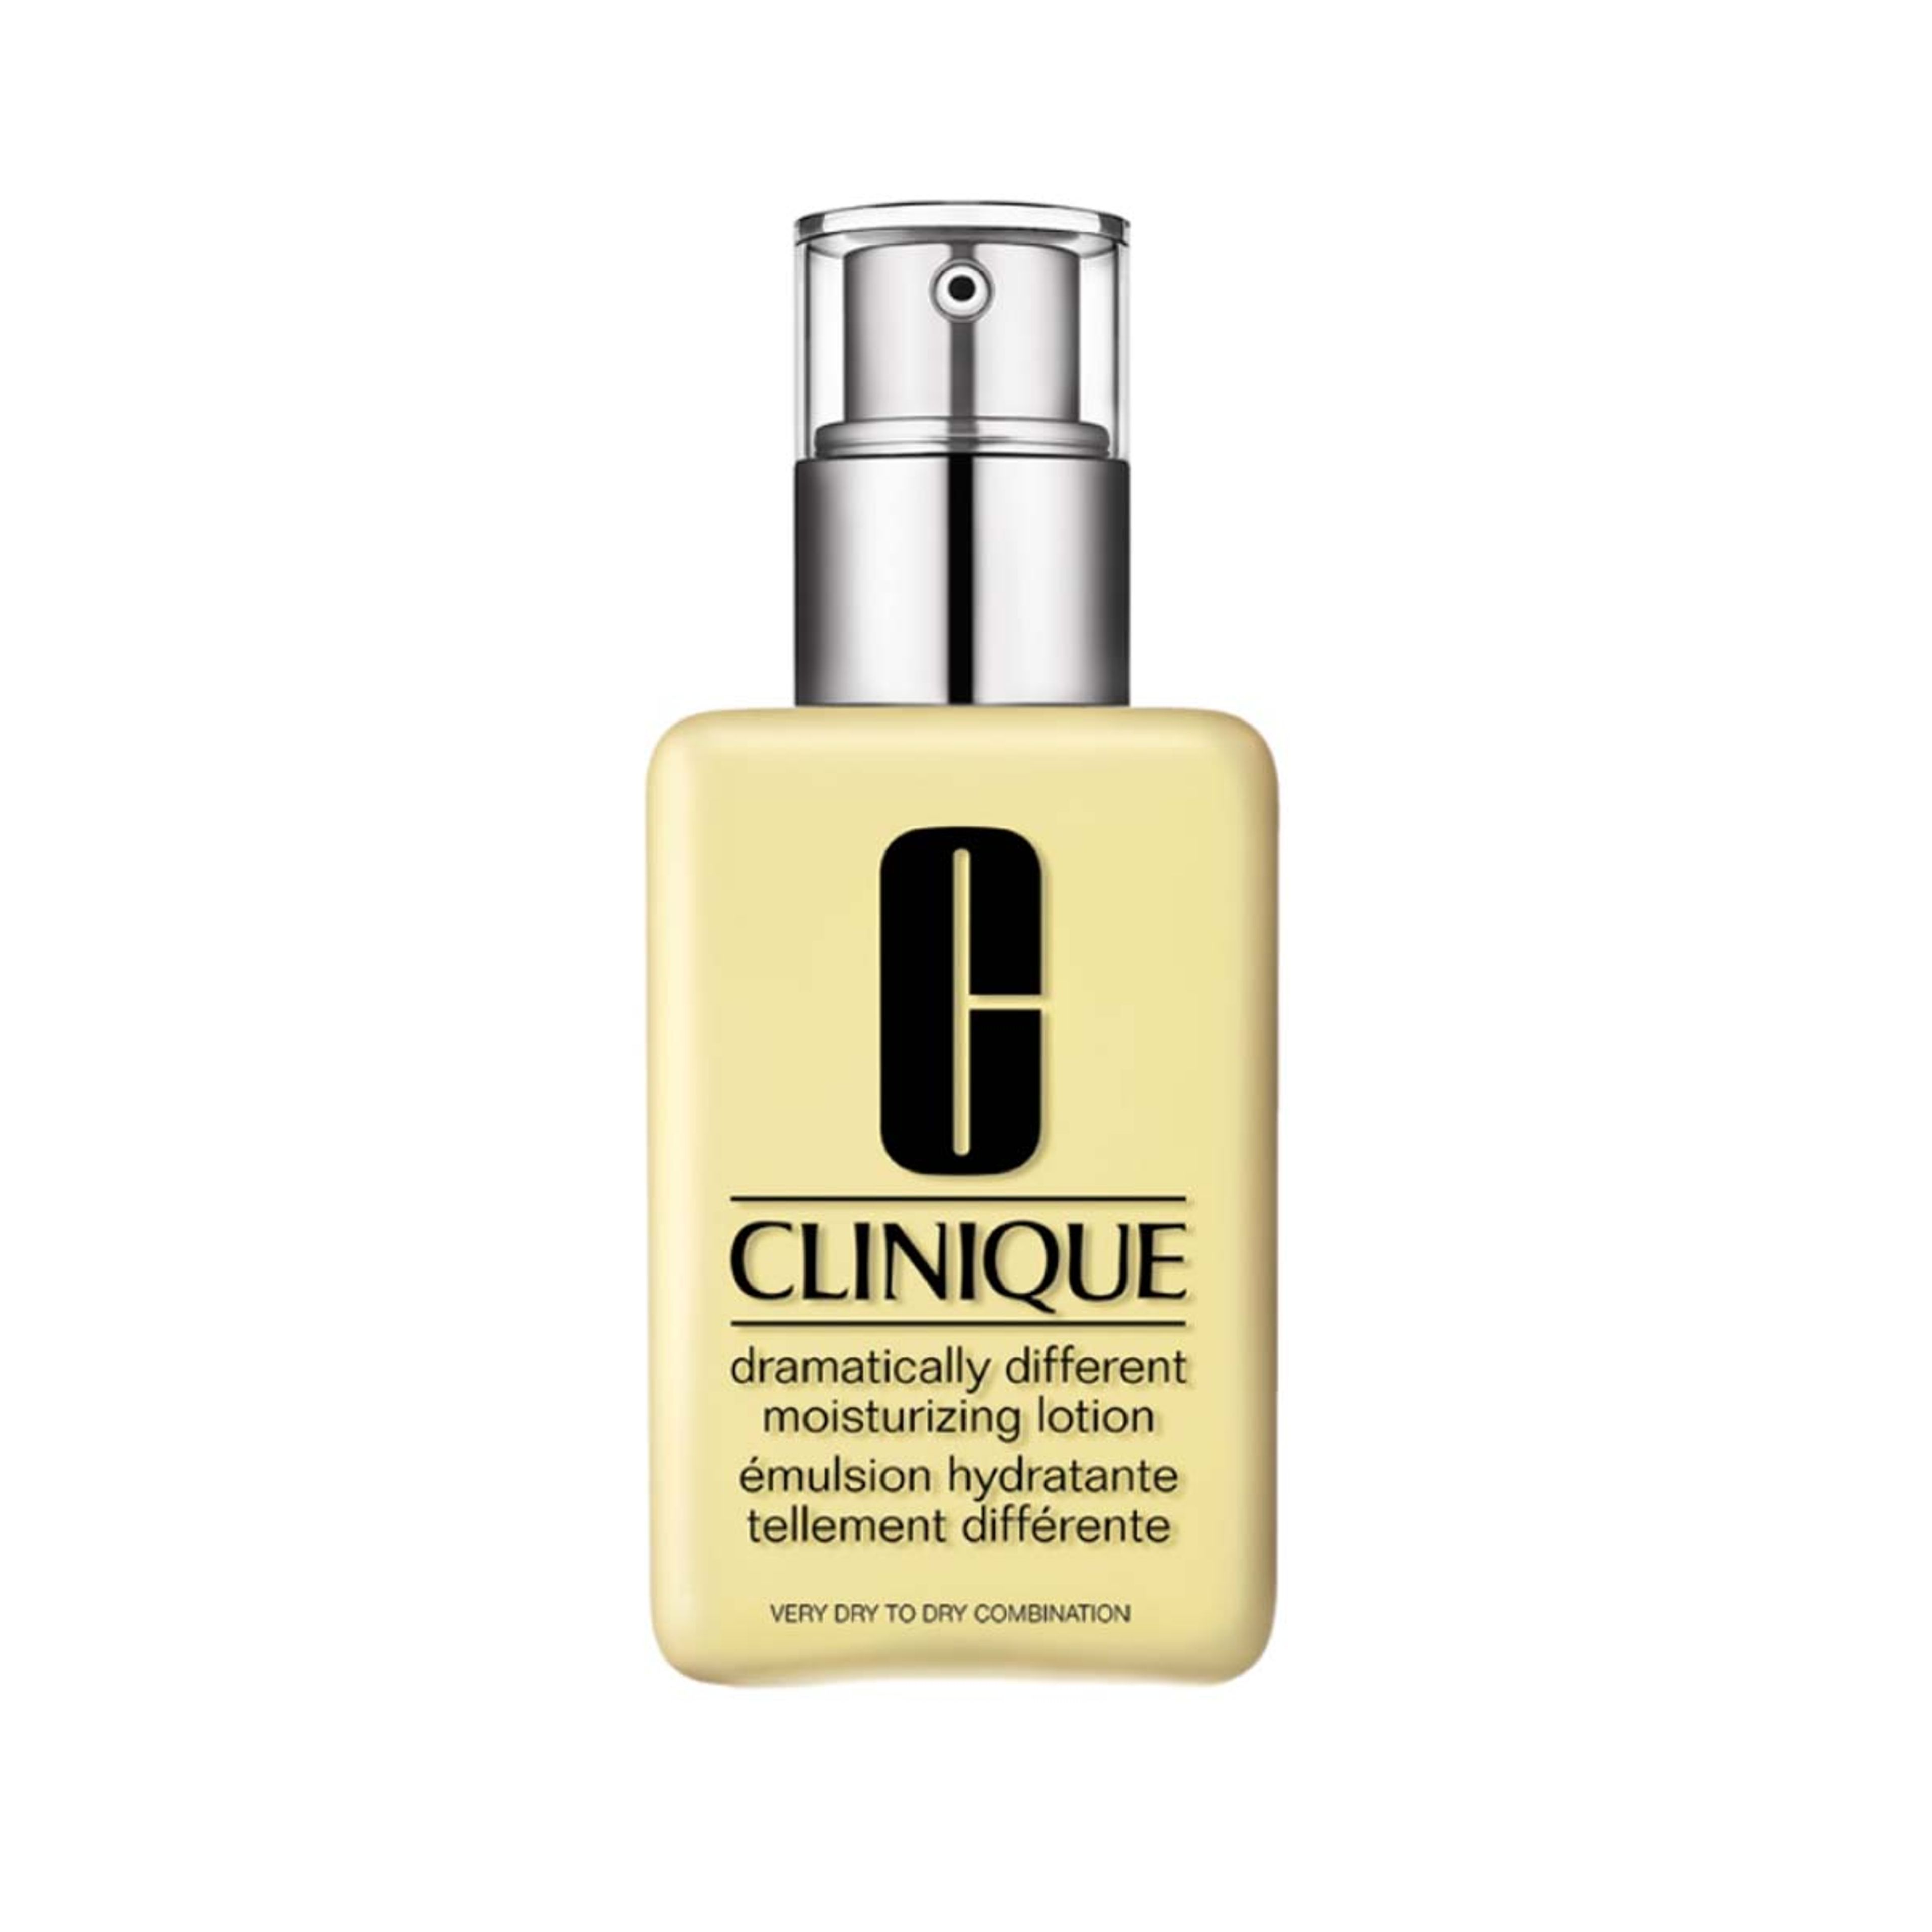 Clinique Dramatically Different Moisturizing Lotion+ 1